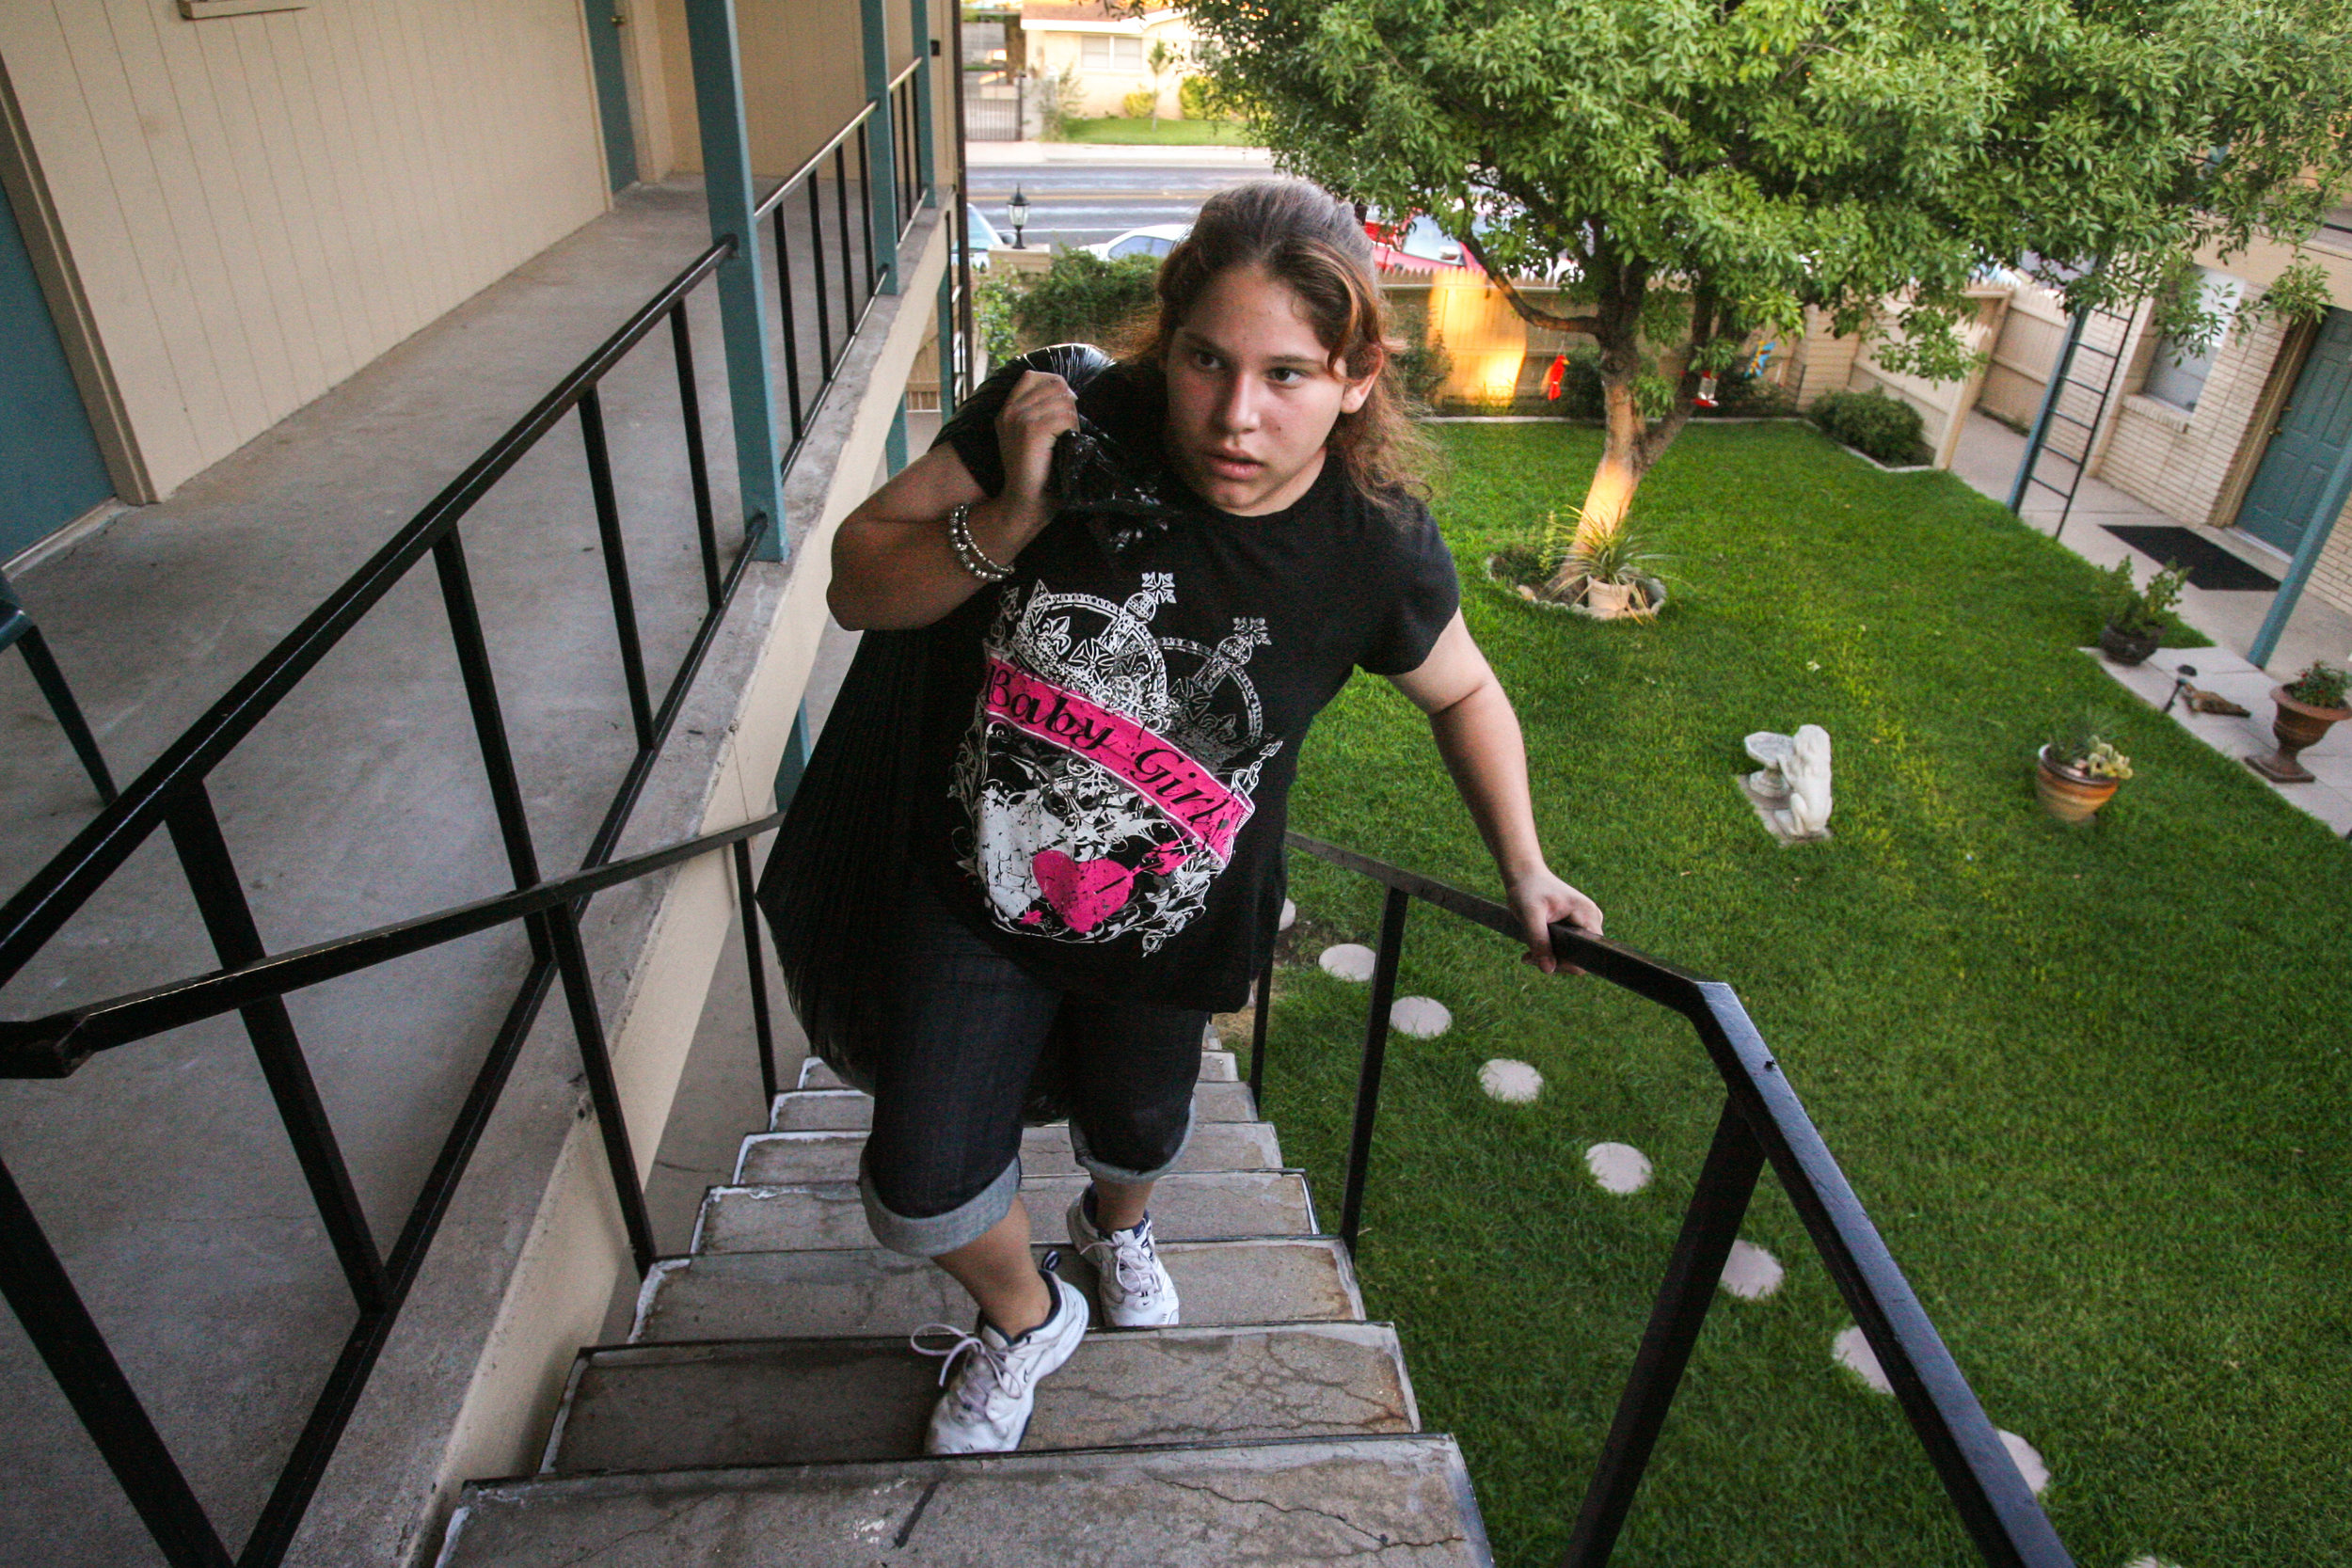  Angelica Brito , 12, climbs the stairs to the new apartment she'll share with her mom as she brings a sack full of belongings Saturday, Sept. 6, 2008, at the Maple Terrace Apartments in Odessa, Texas. 